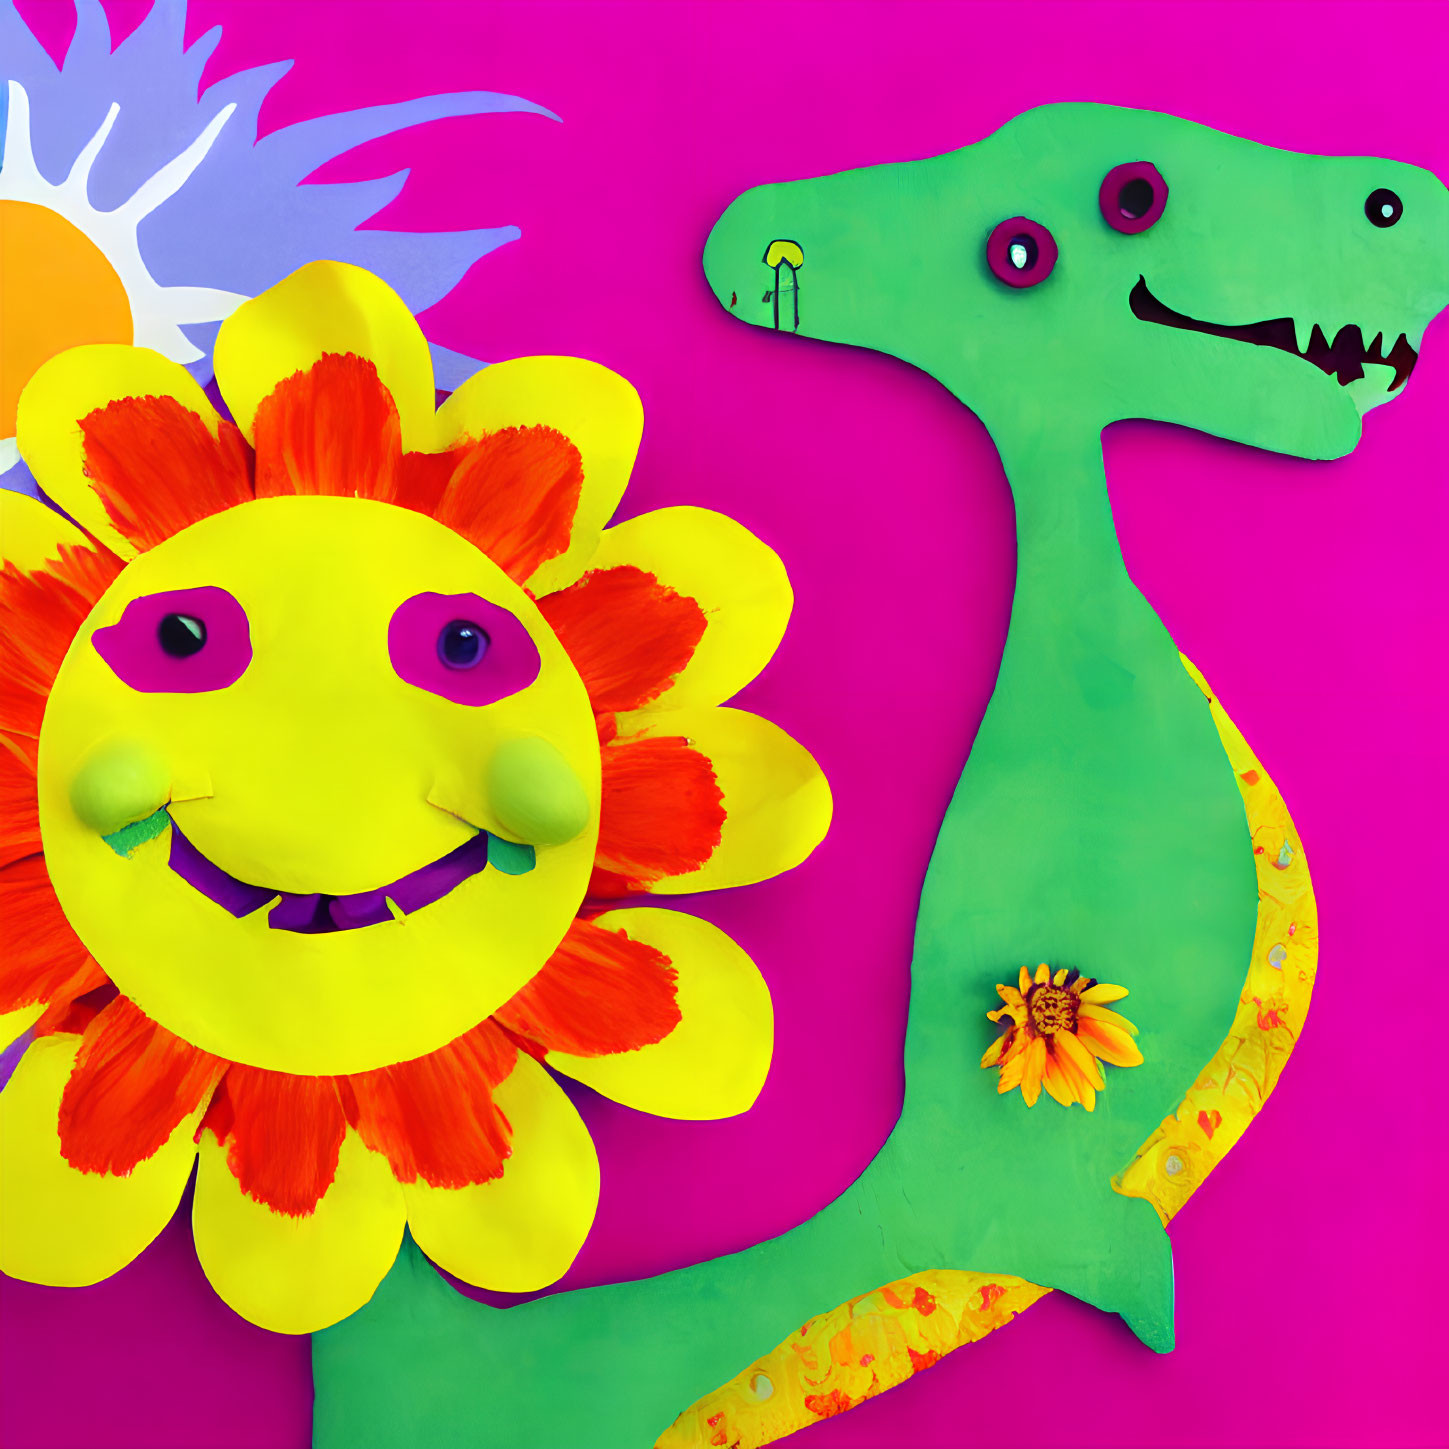 Colorful Paper Art Scene with Flower and Dinosaur on Pink Background